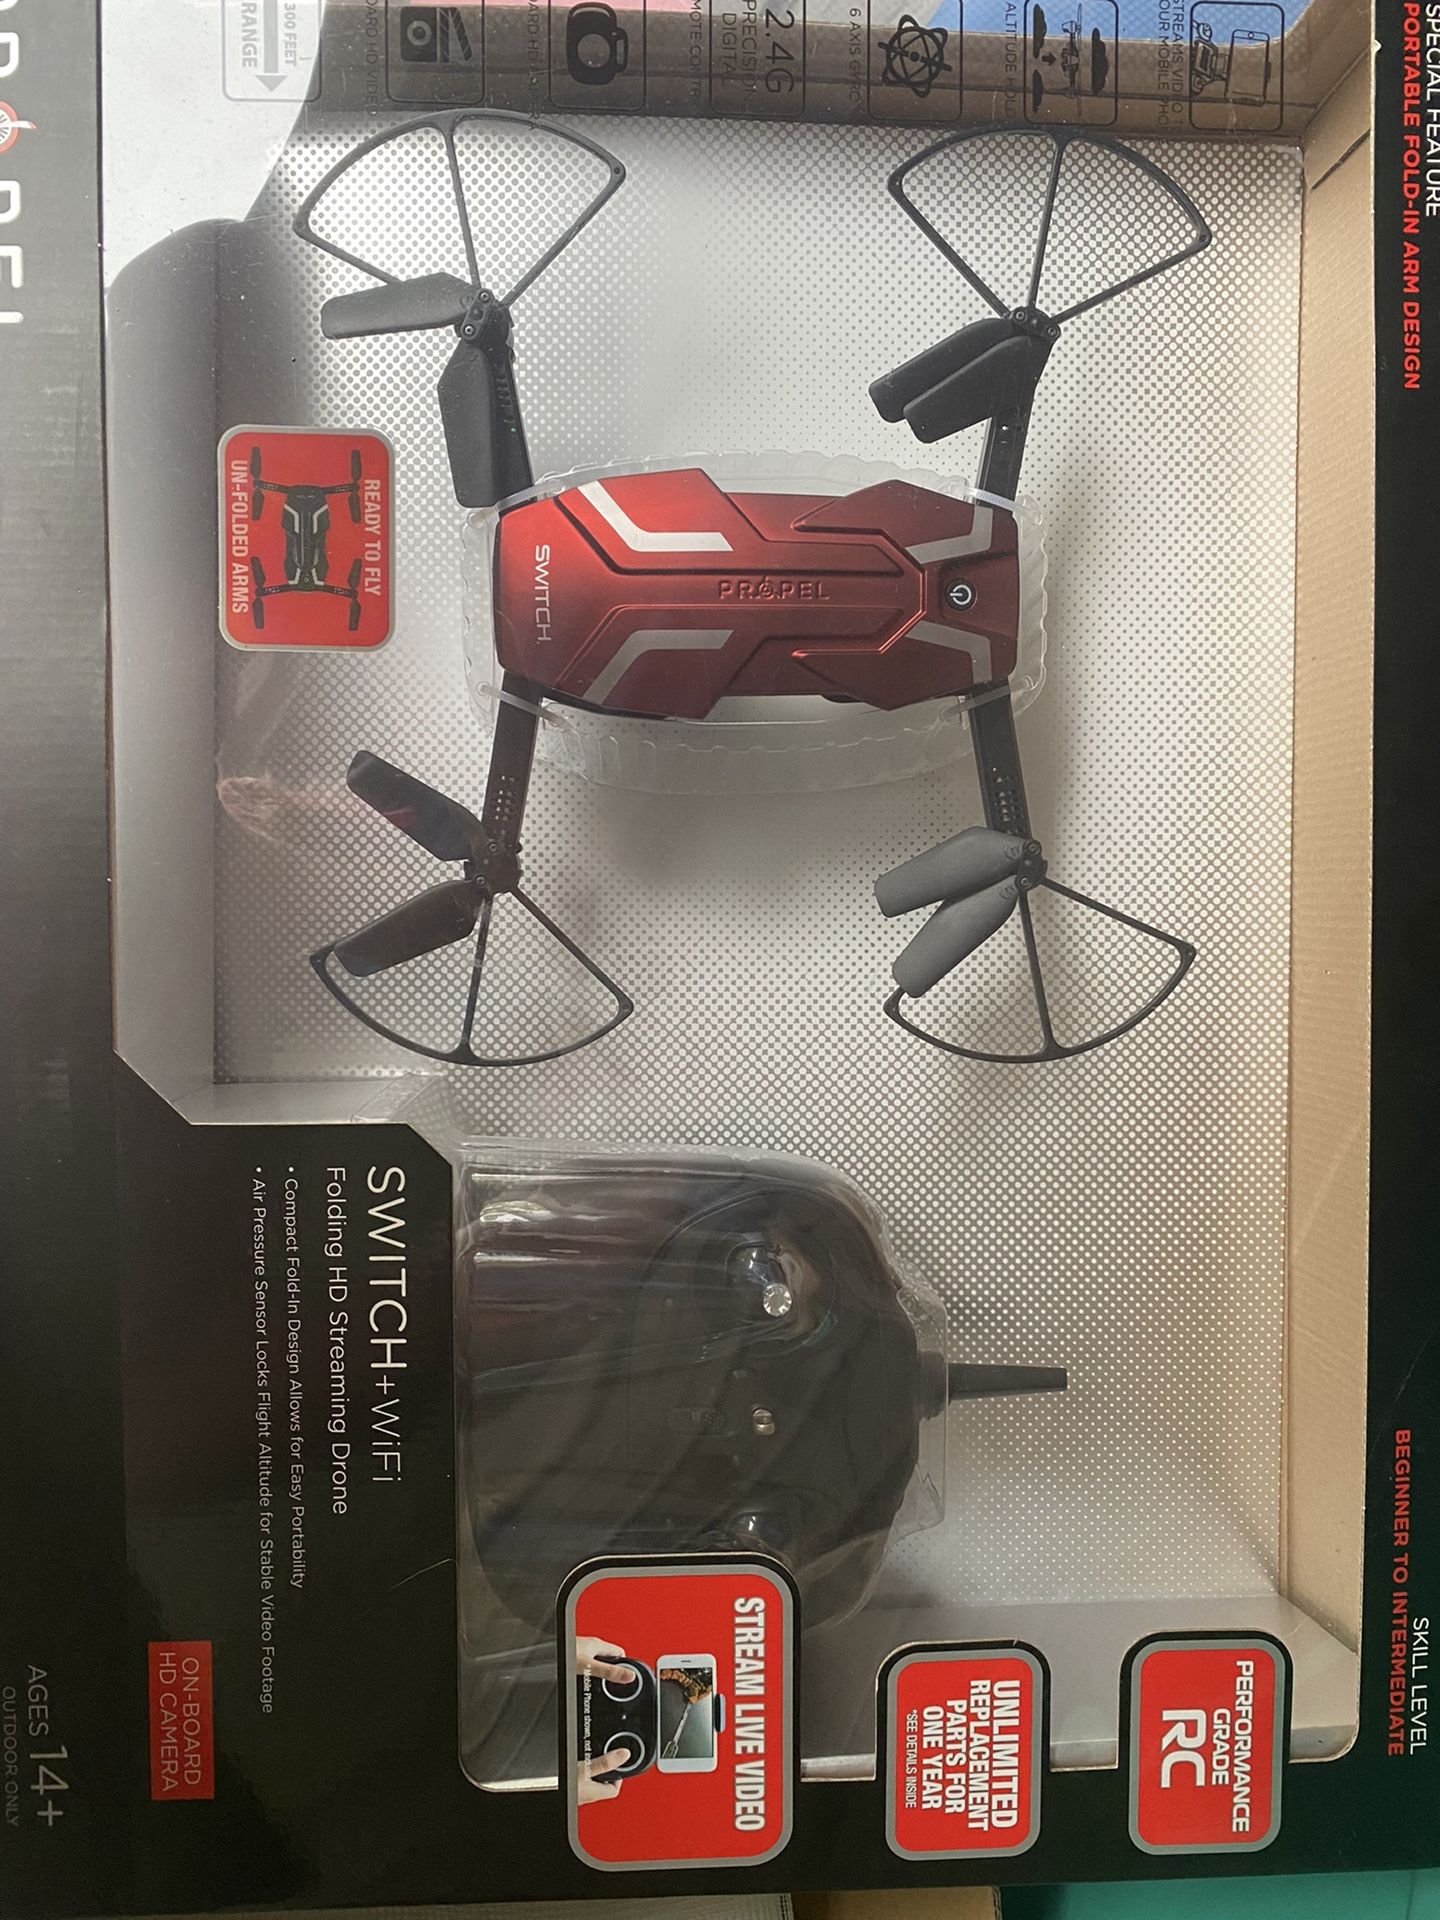 Remote Drone Brand New Never Opened